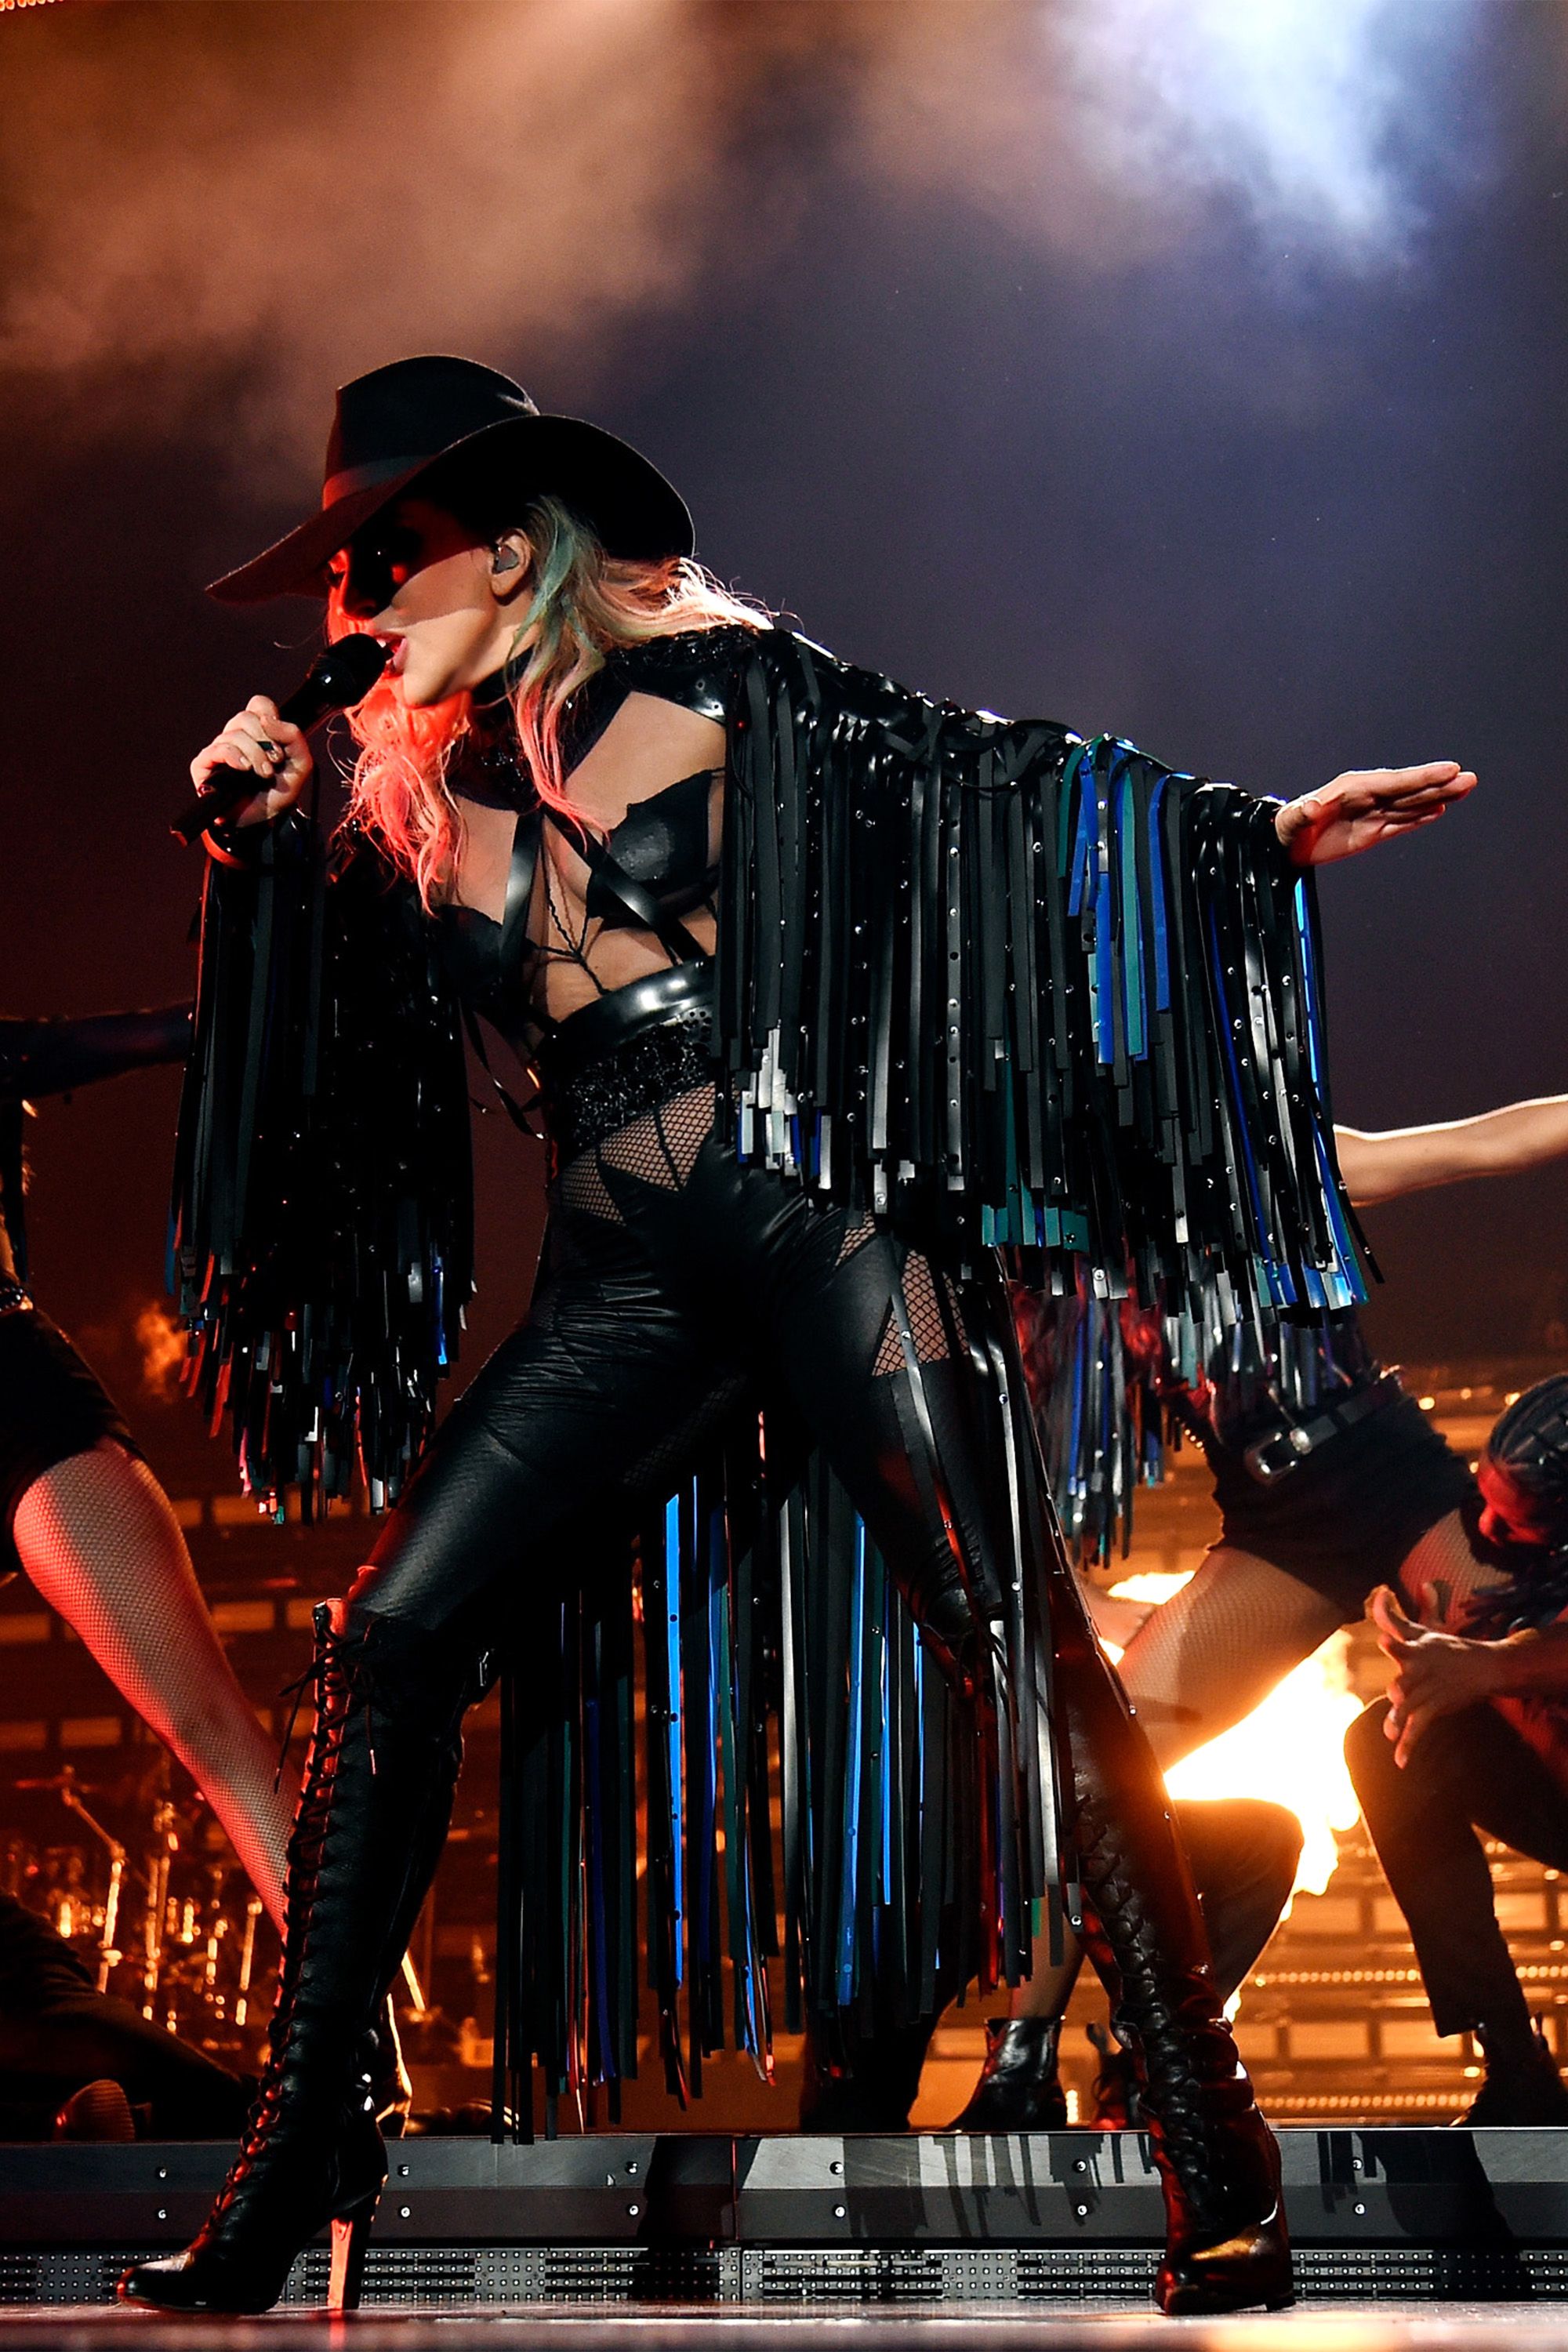 hbz-lady-gaga-tour-gettyimages-828995556